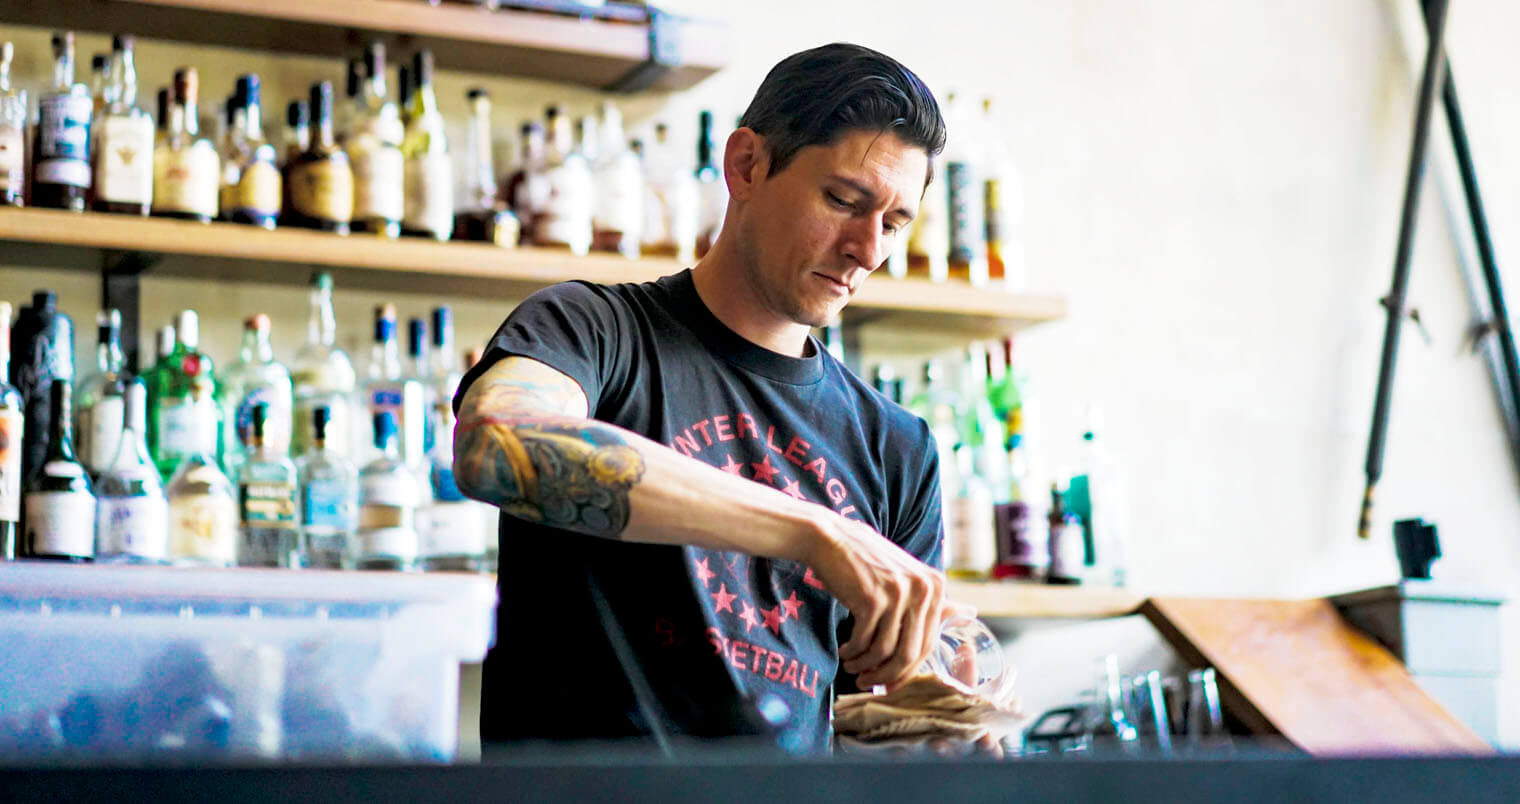 East Bay Spice Company Owner, Adam Stemmler, featured image